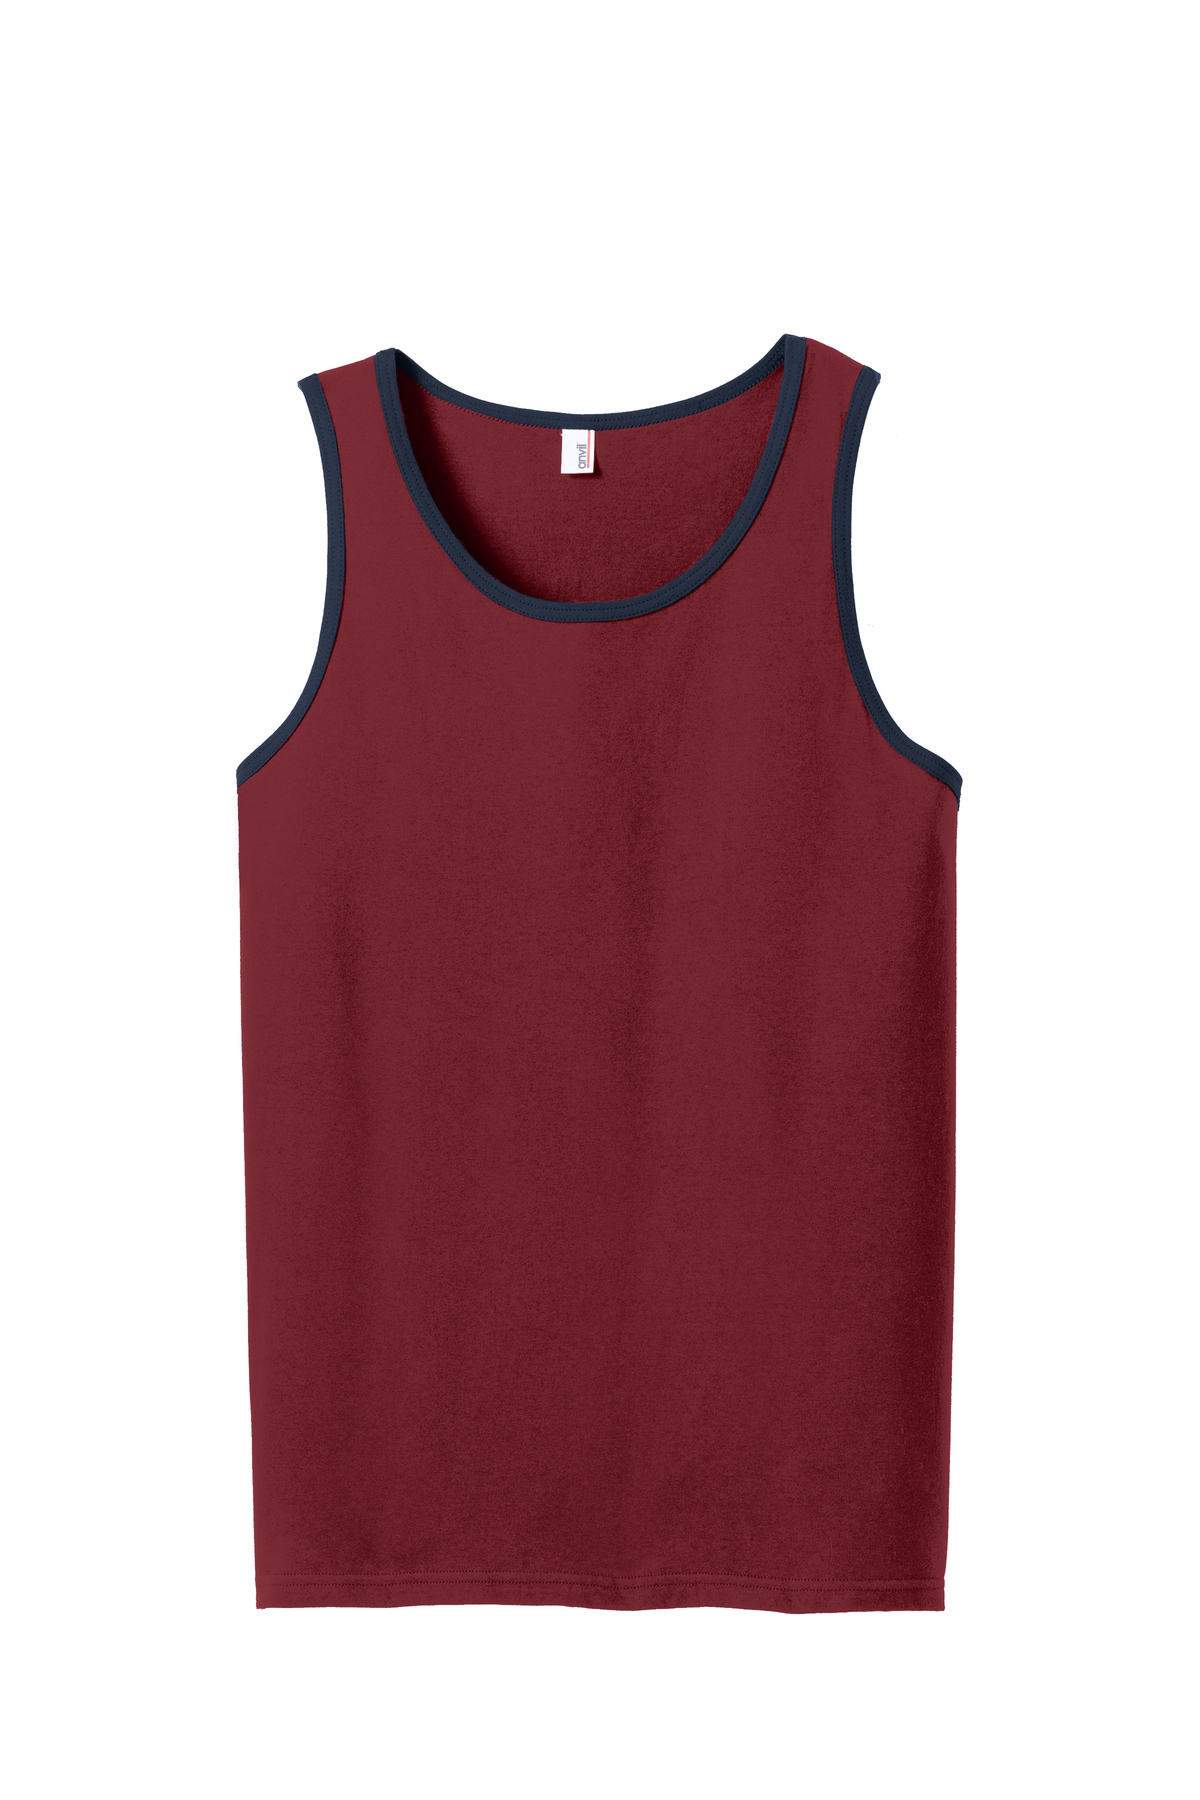 Anvil 100% Combed Ring Spun Cotton Tank Top, Product